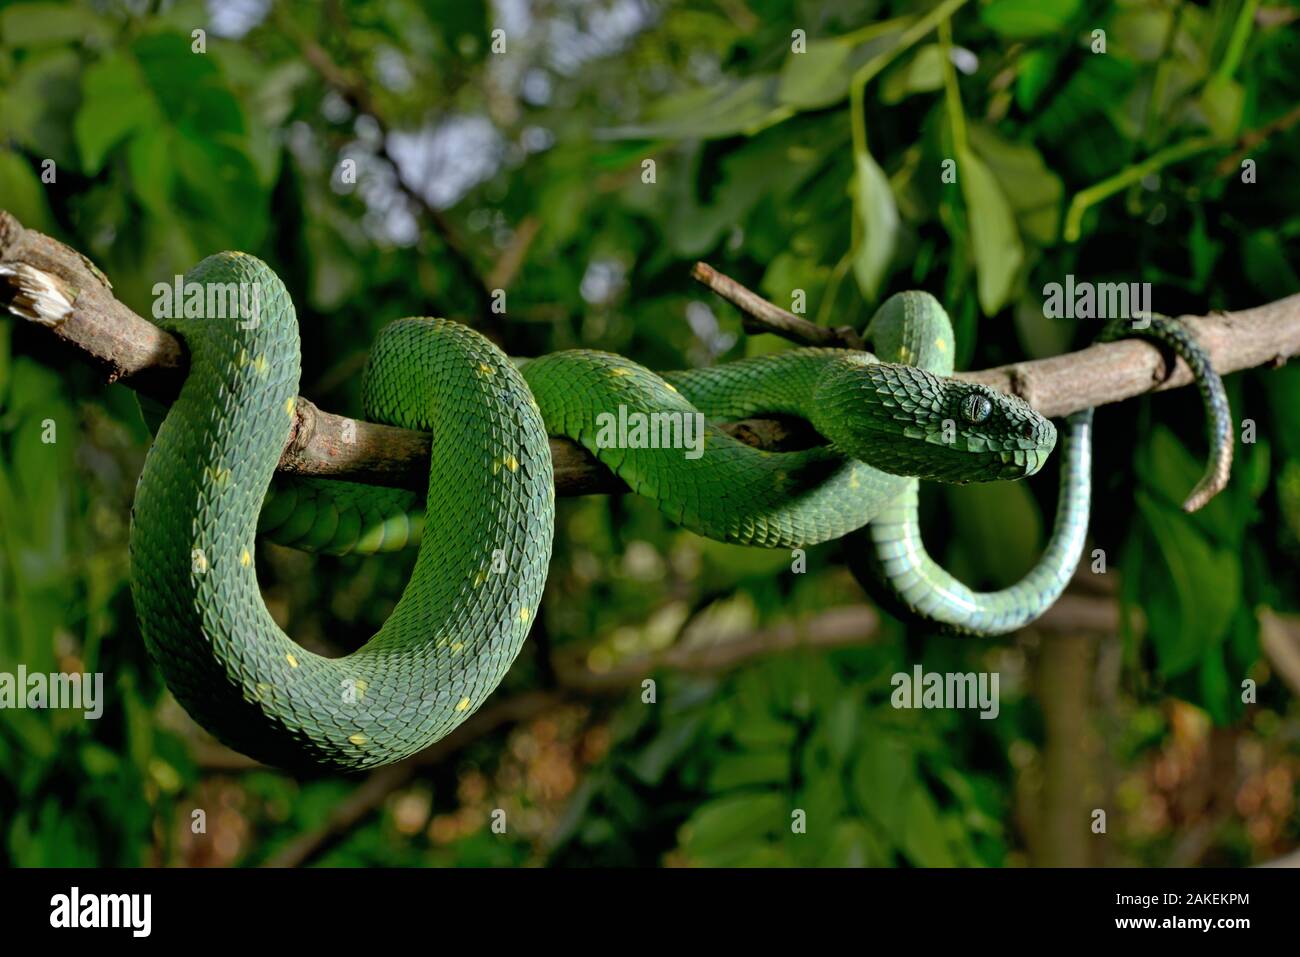 West African tree viper (Atheris chlorechis) on branch Togo. Controlled conditions Stock Photo